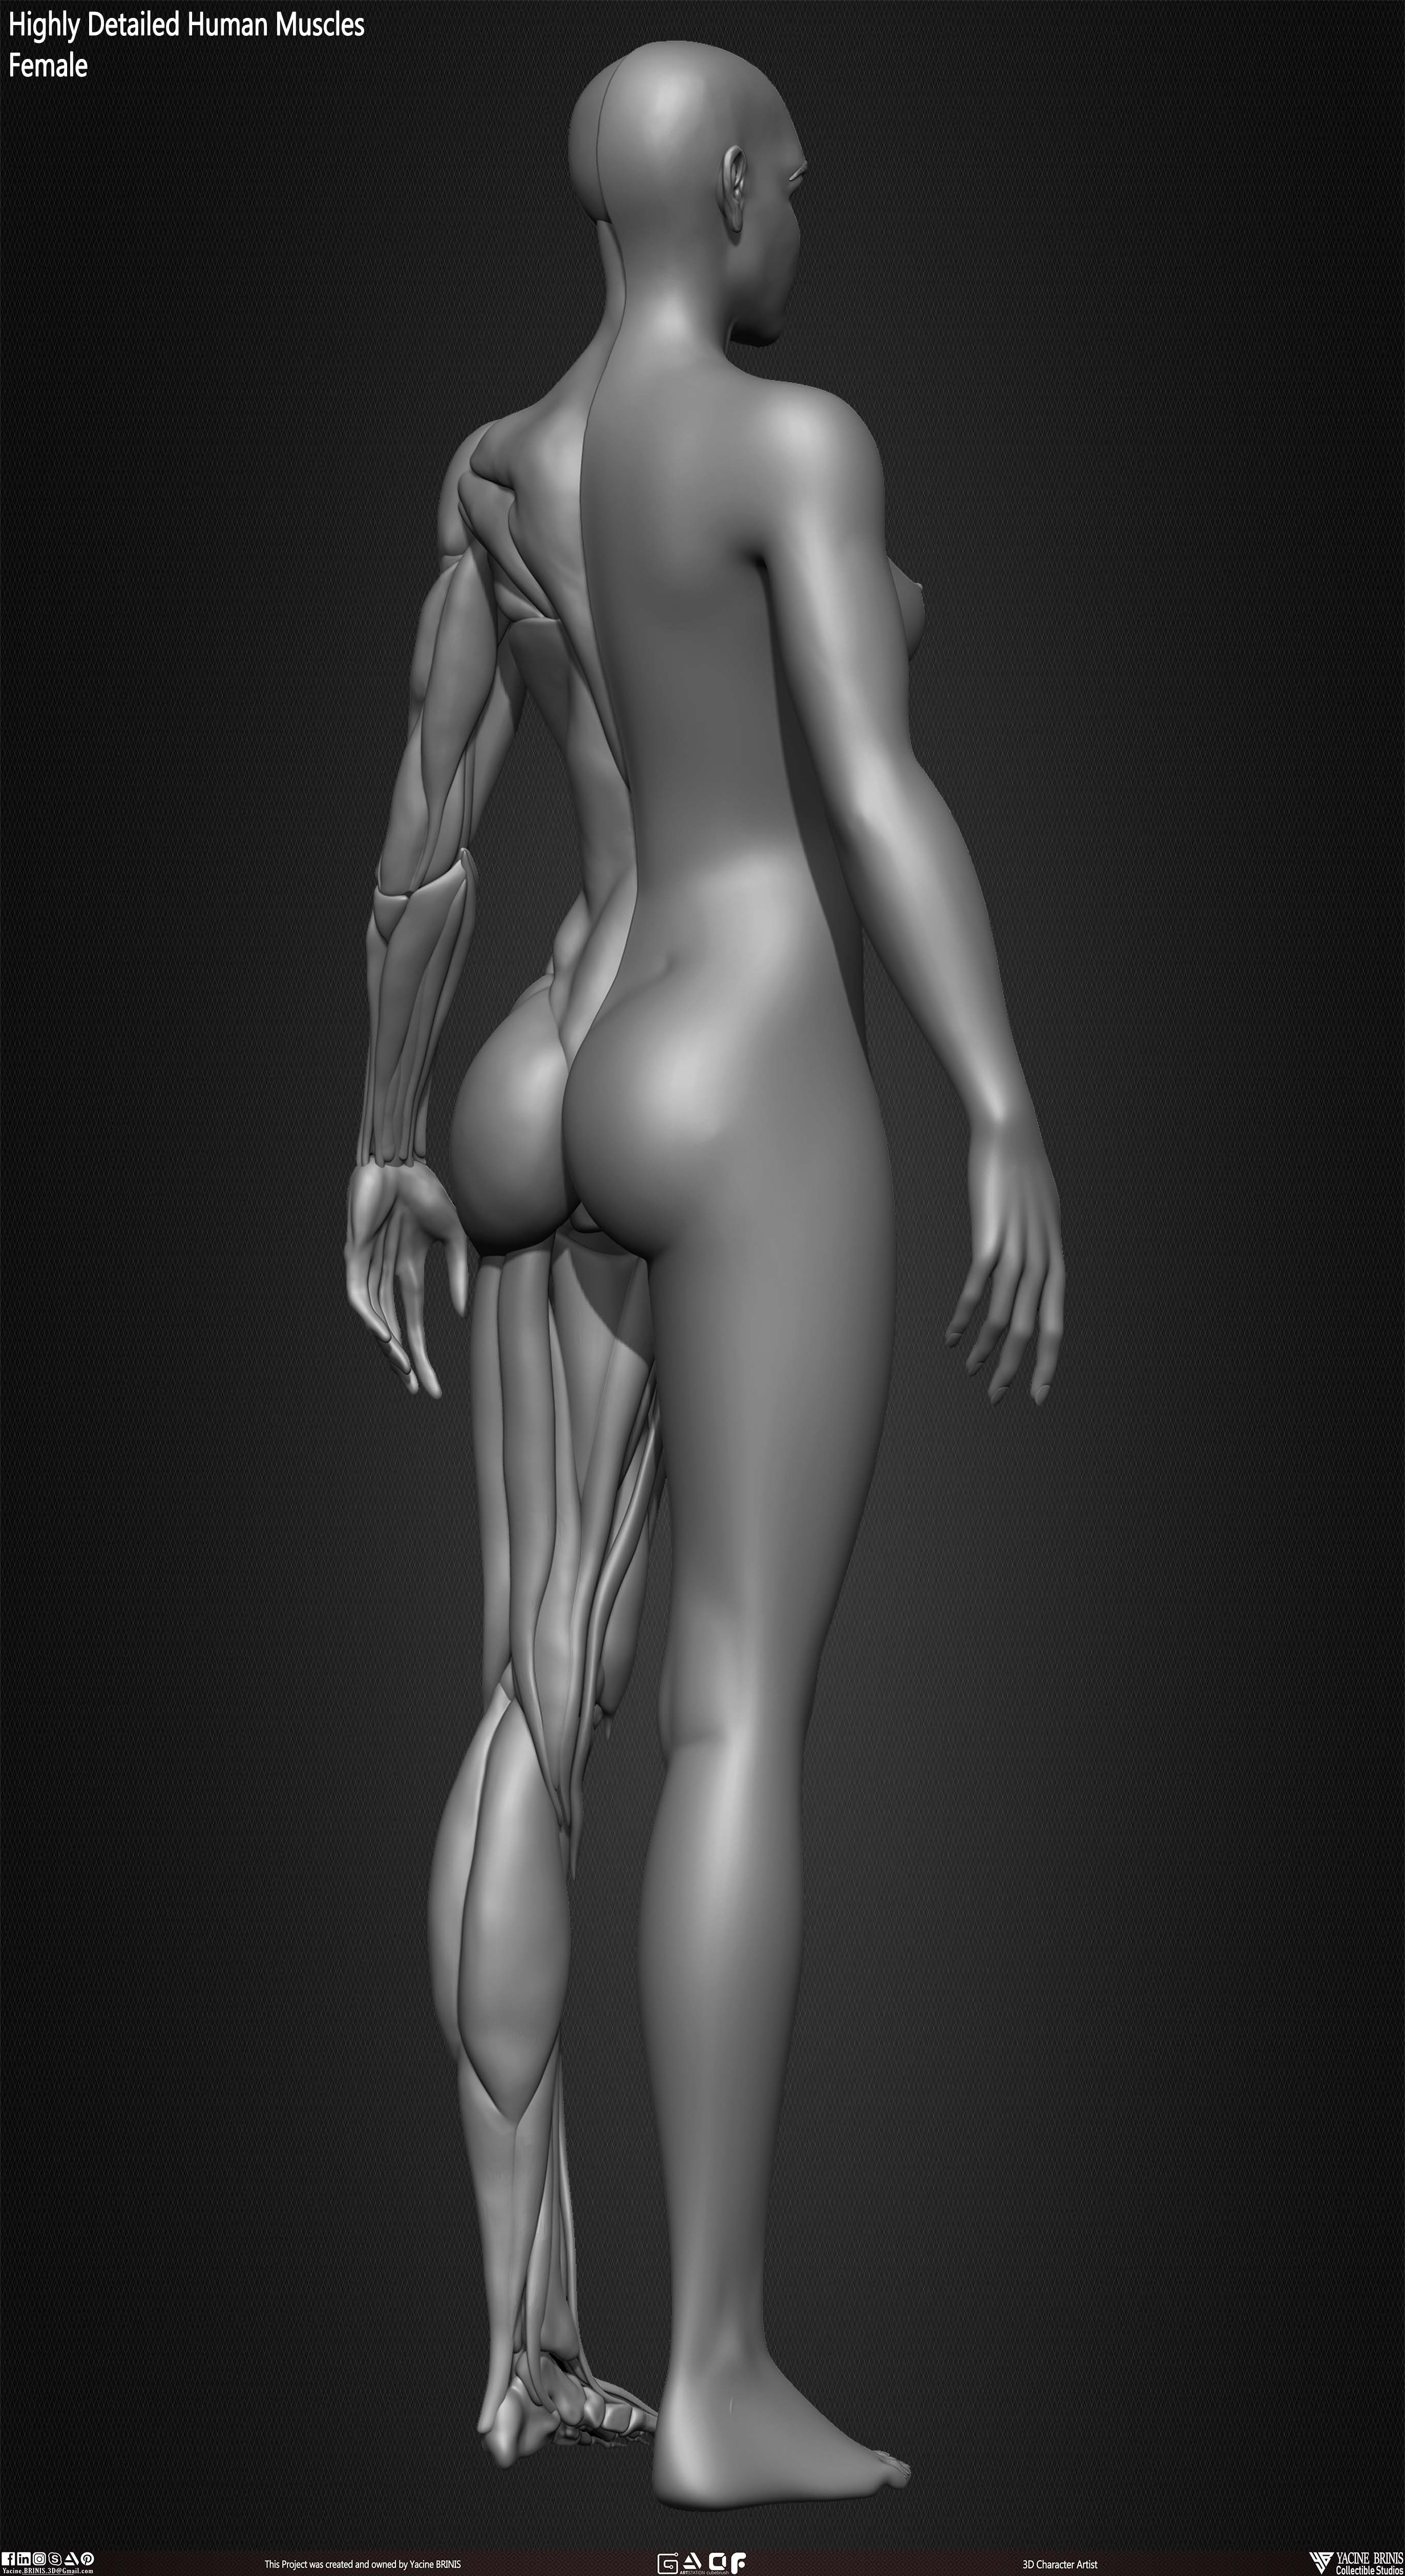 Female Human Muscles 3D Model sculpted by Yacine BRINIS 011